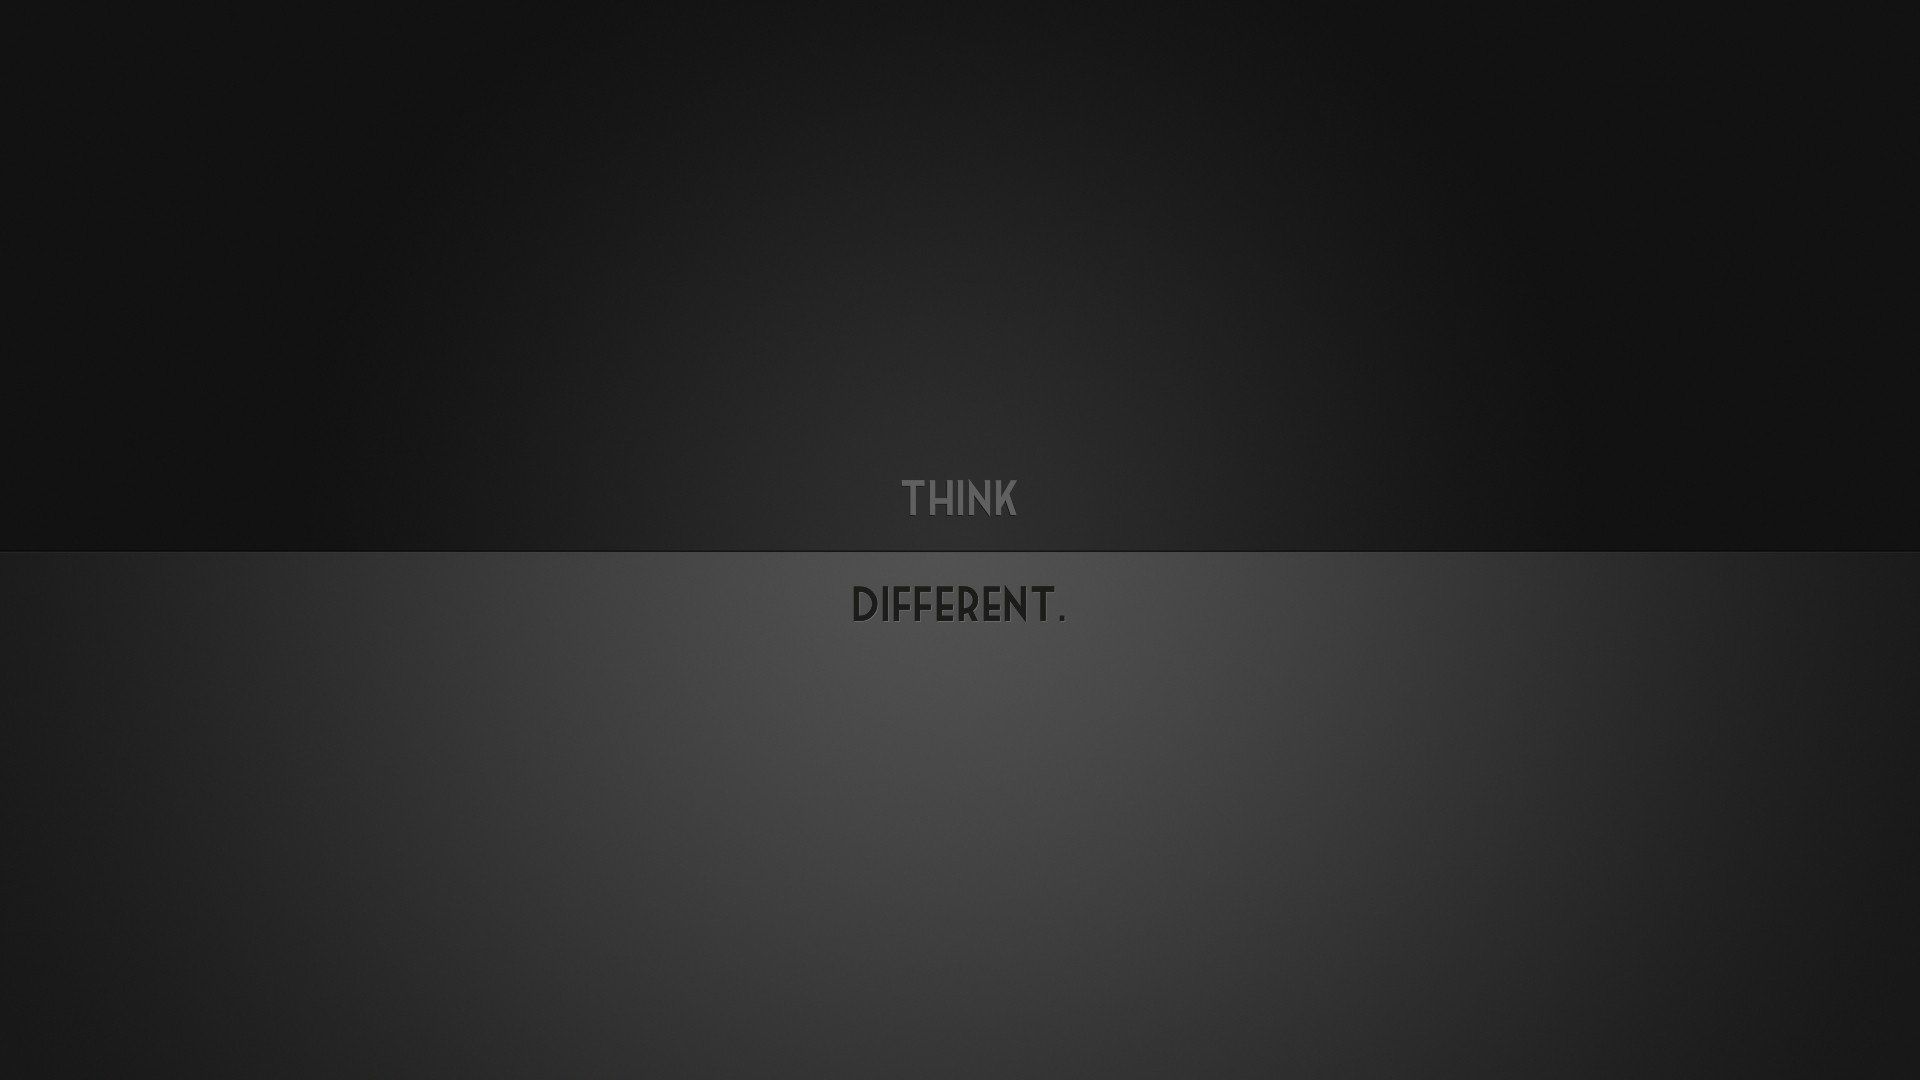 Free download 1920x1080 Minimalistic Think Different desktop PC and Mac wallpaper [1920x1080] for your Desktop, Mobile & Tablet. Explore Minimalist Wallpaper for Desktop. Free Awesome Desktop Wallpaper, PC Background